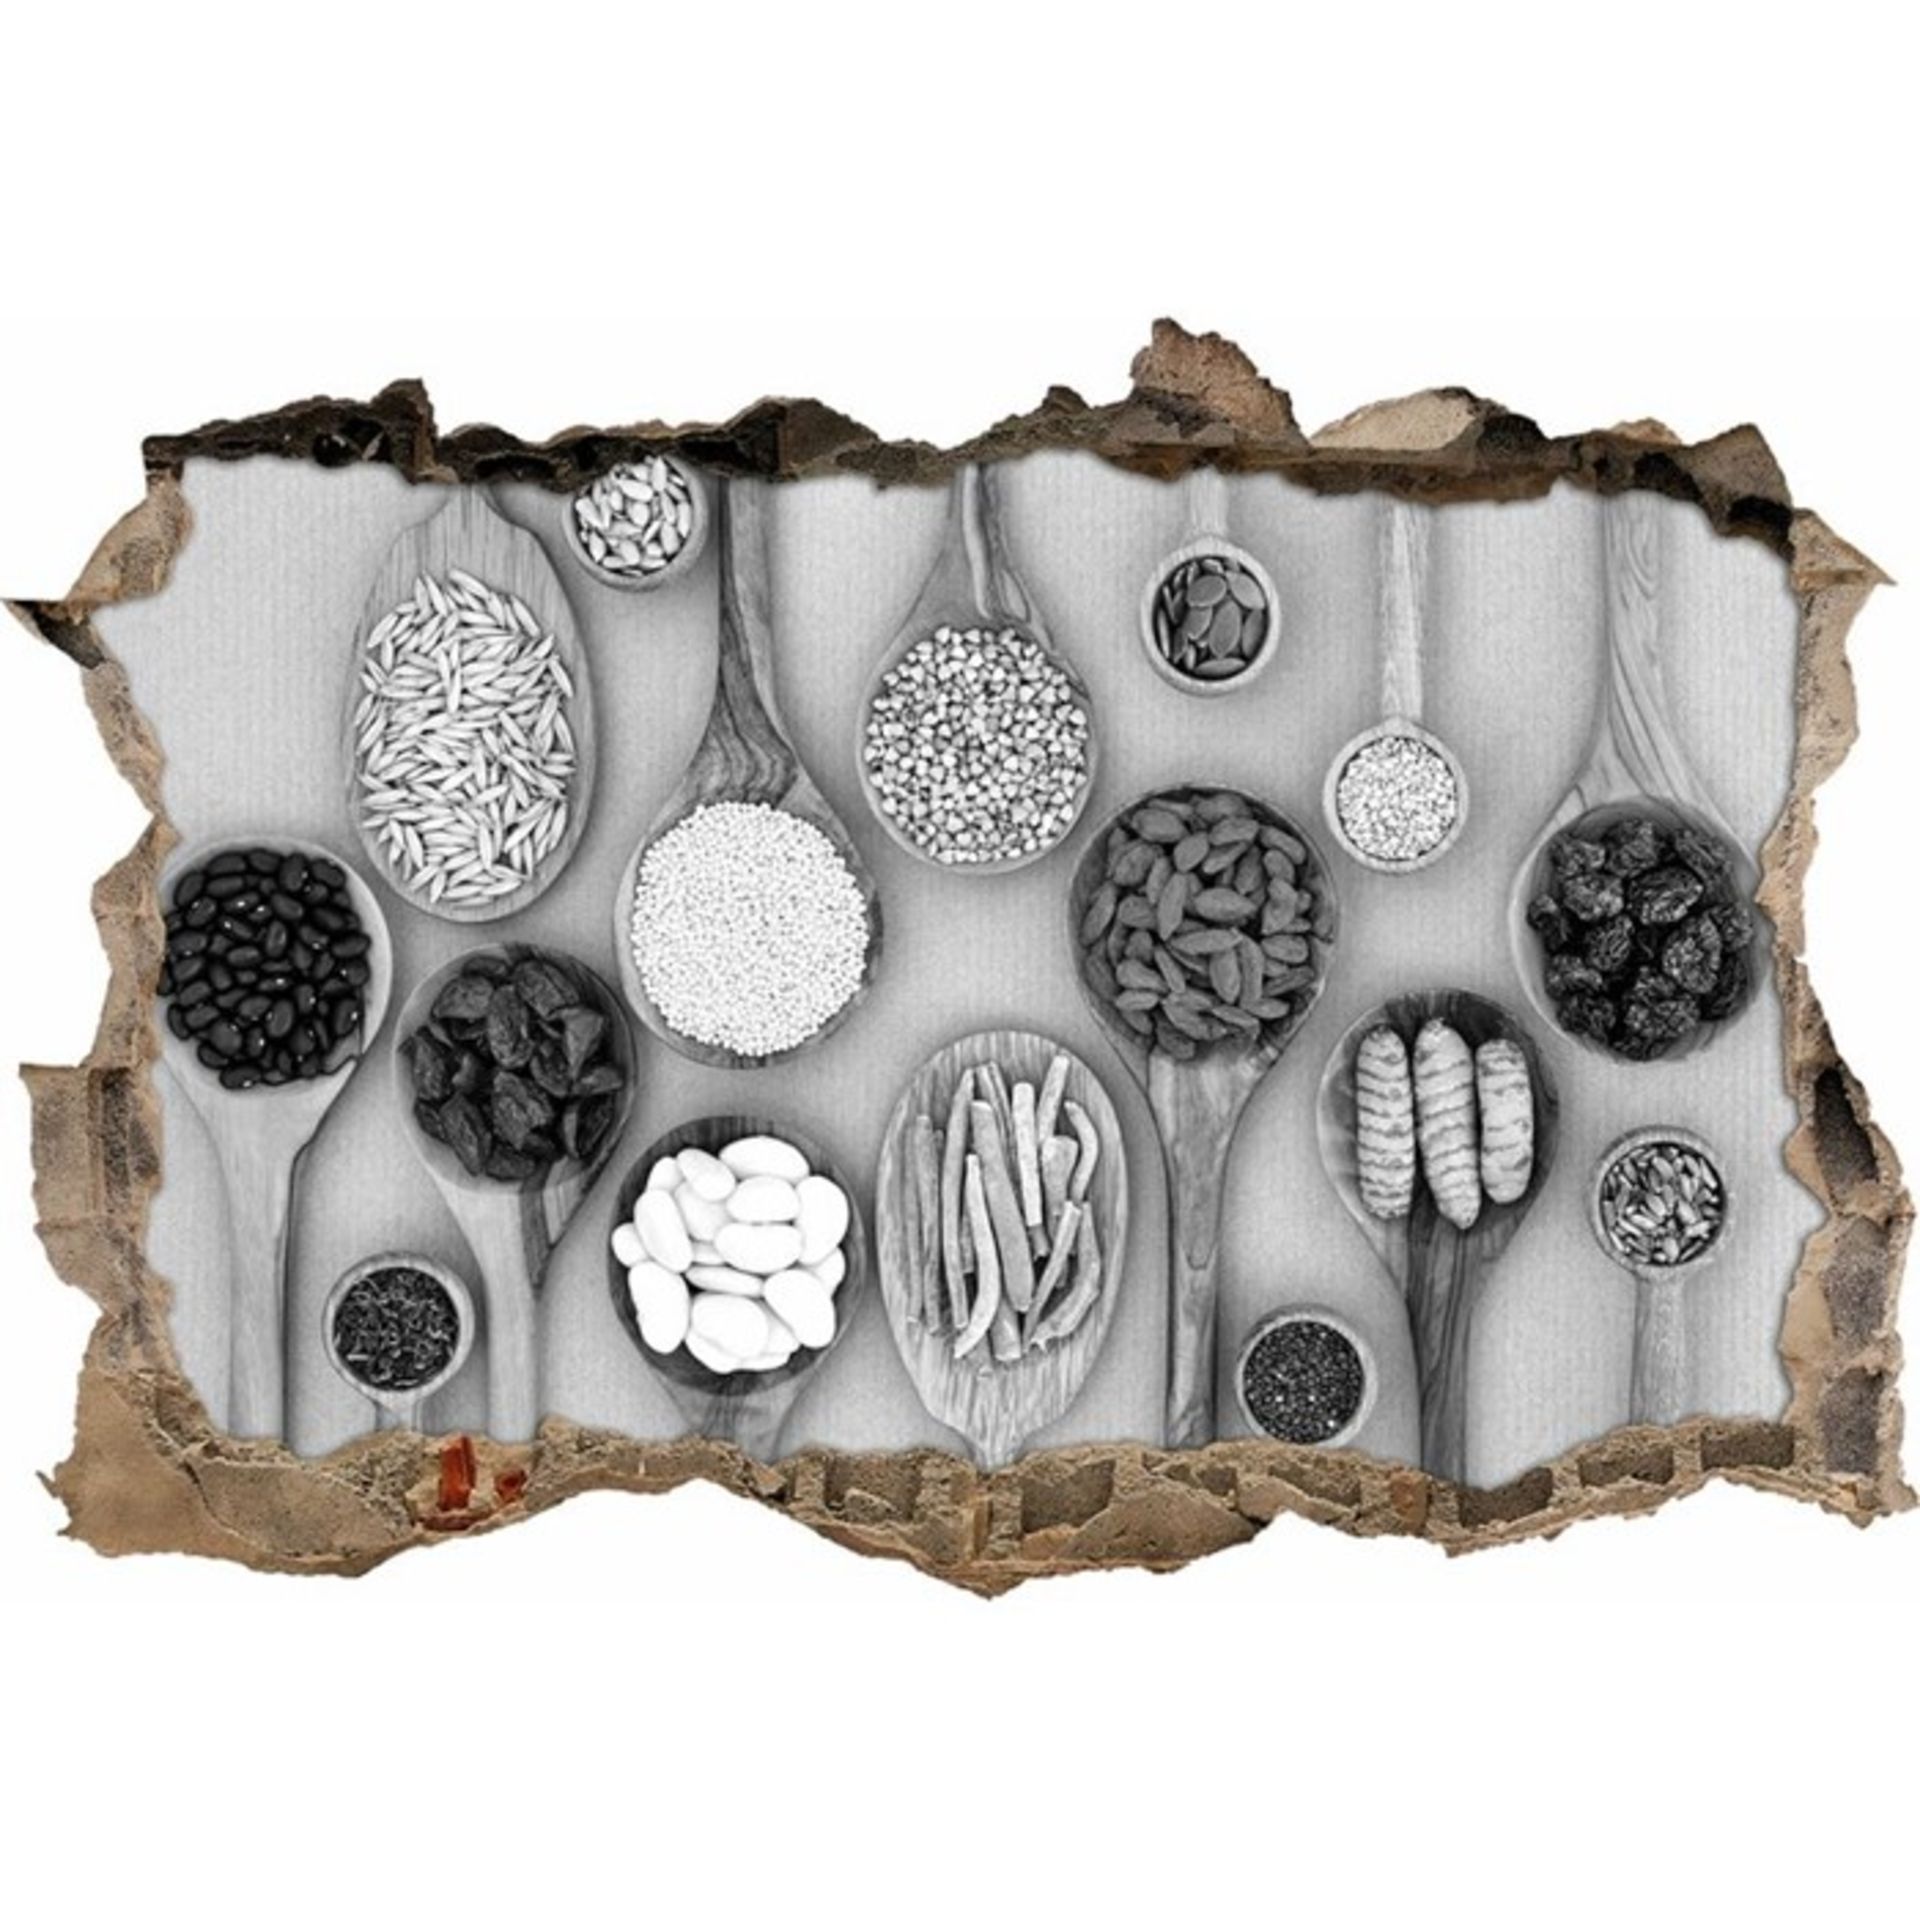 East Urban Home, Dried Super Health Food on Wooden Spoons Wall Sticker (ROLLED UP) - RRP £39.99 (